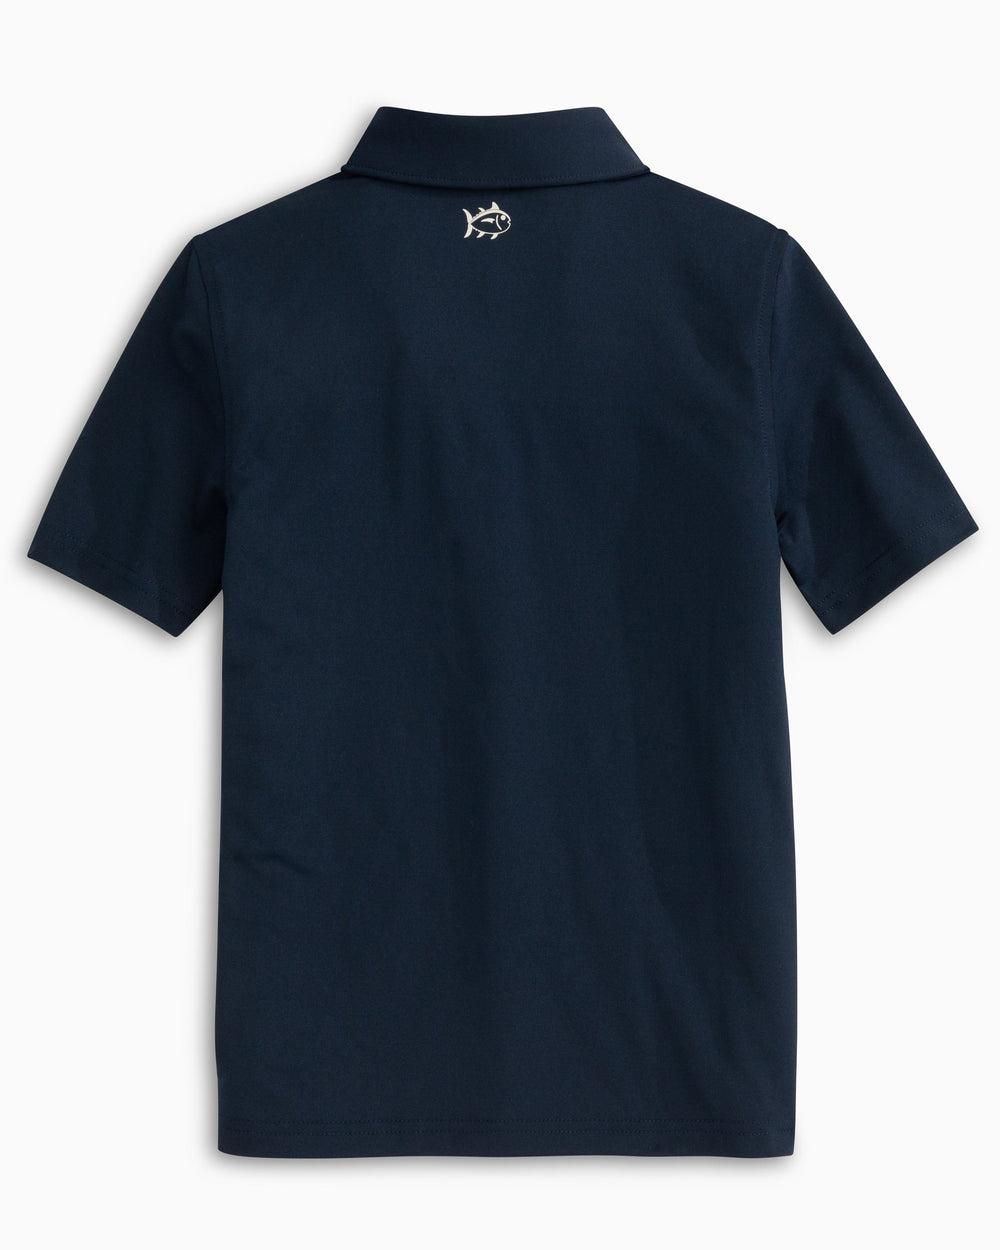 The back view of the Boys Driver Performance Polo Shirt by Southern Tide - True Navy